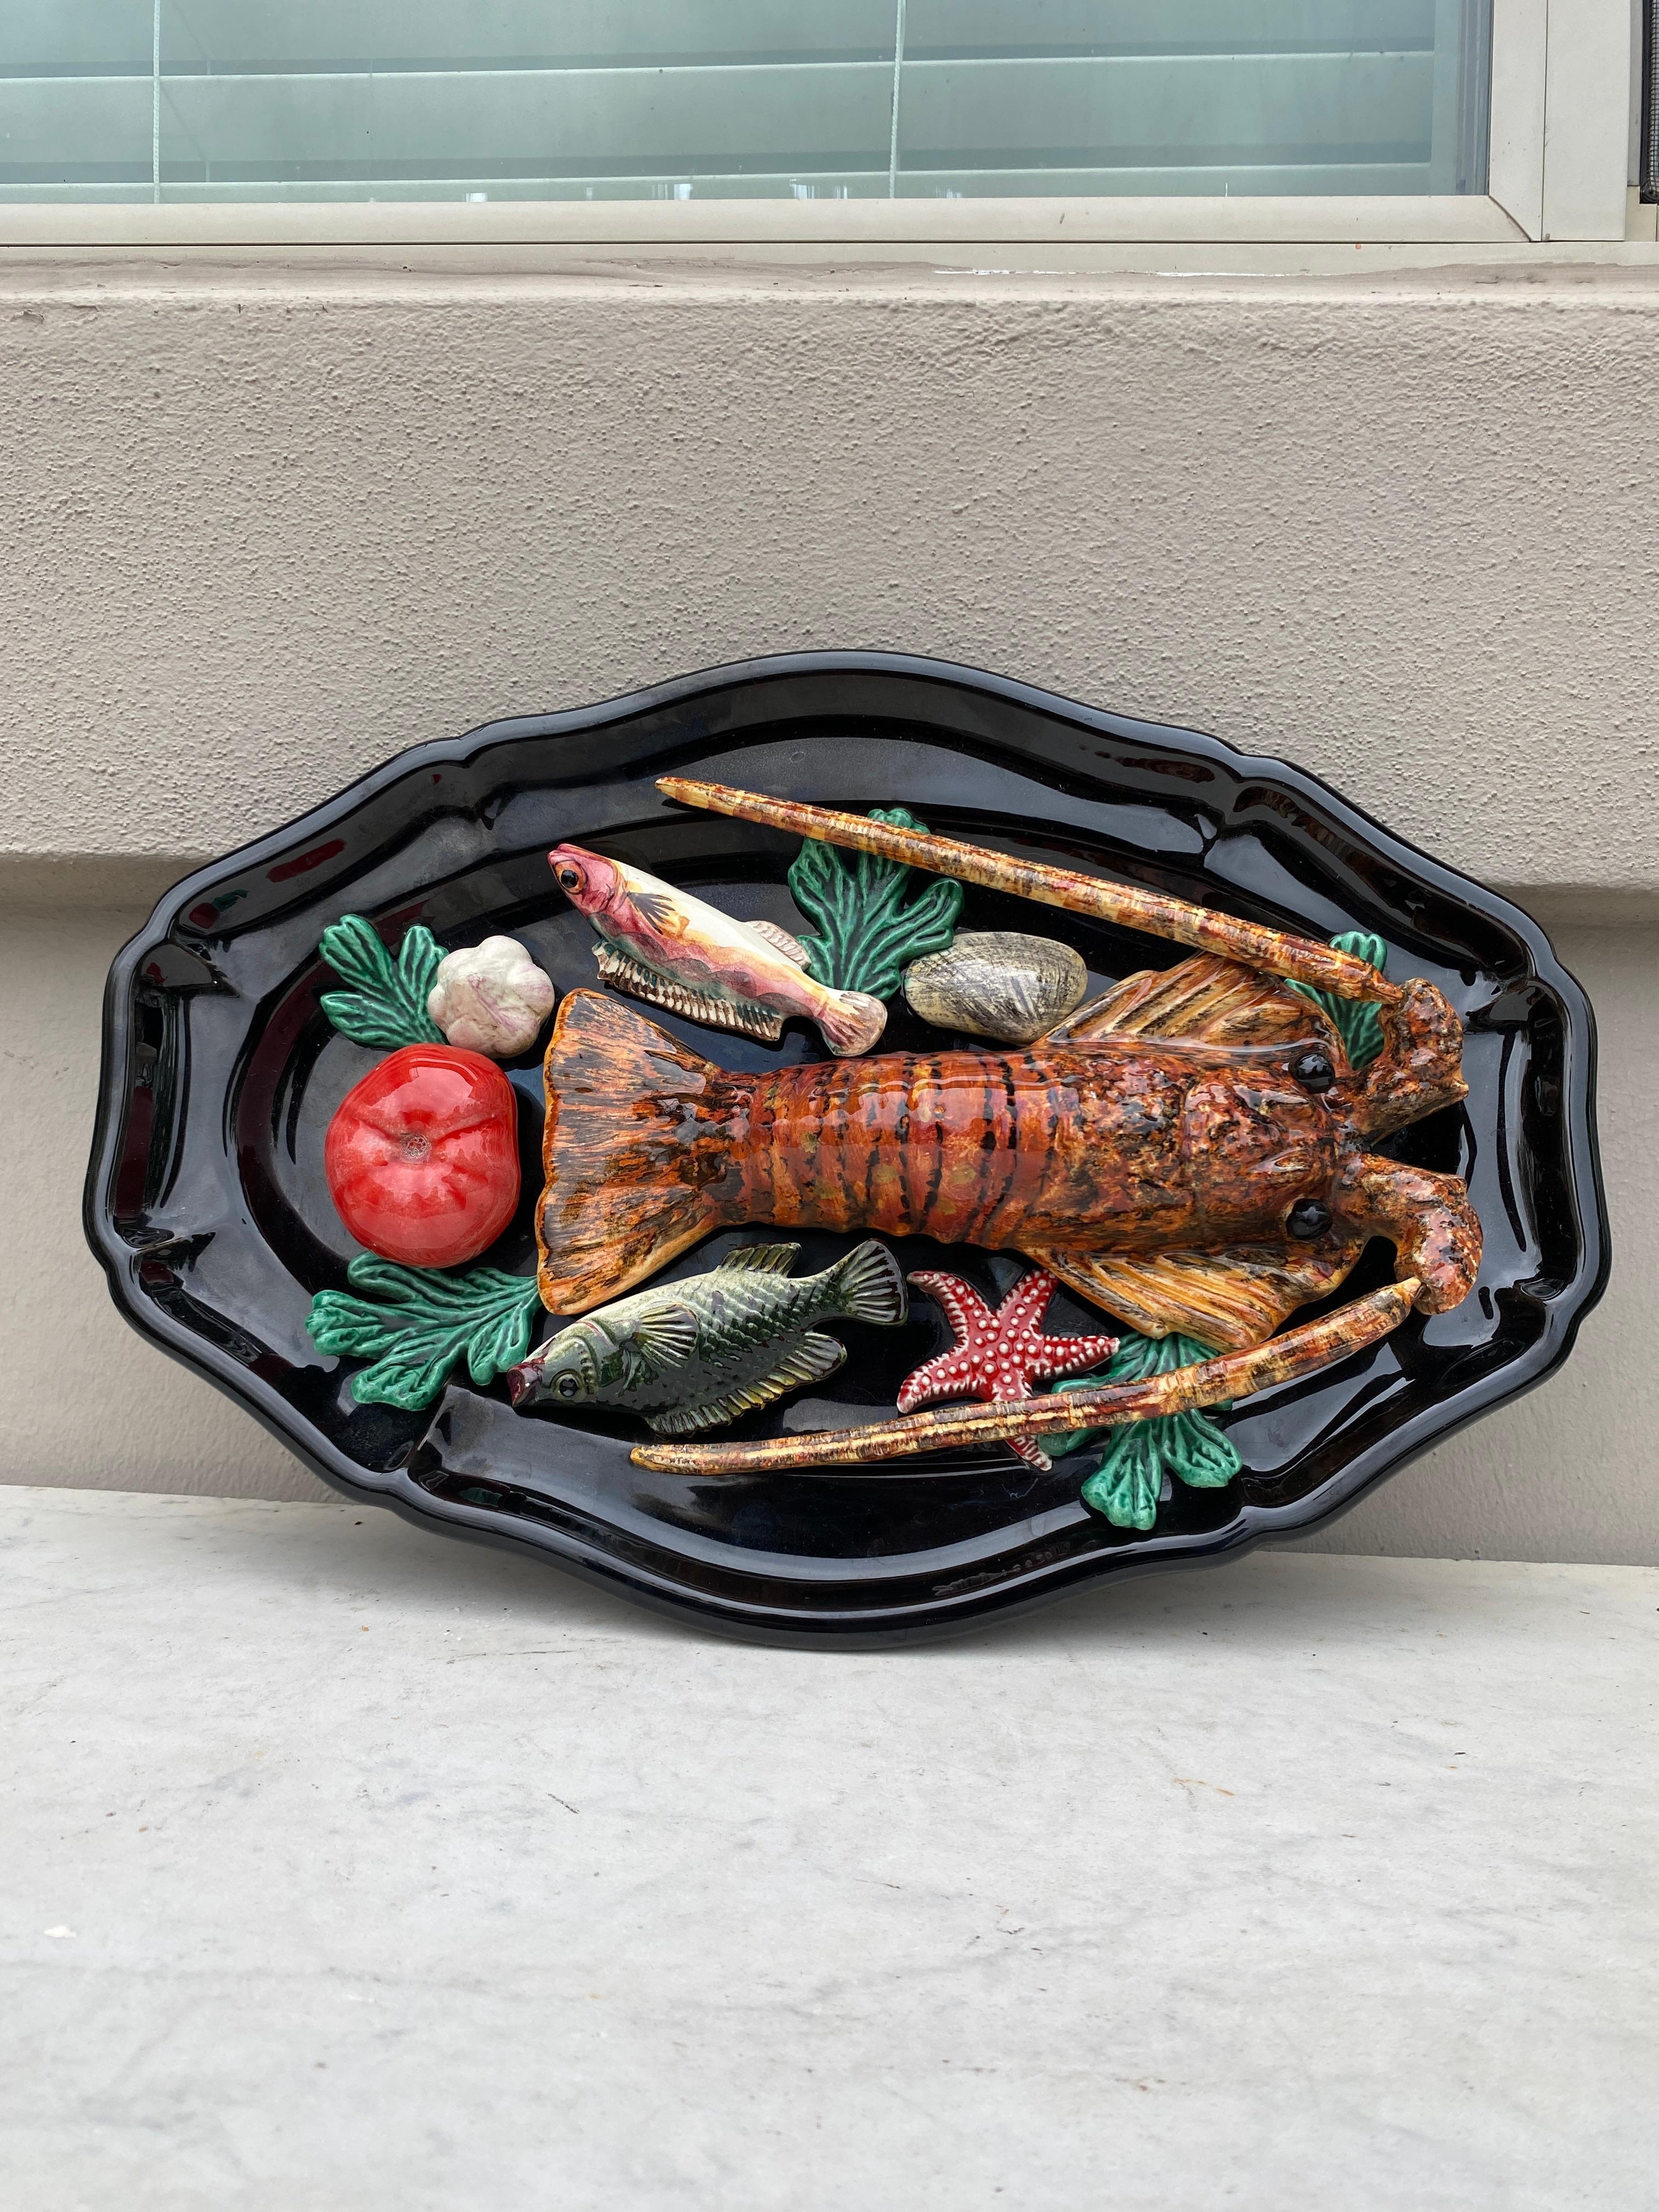 French Oval Majolica Palissy Fish & Lobster Platter Vallauris, circa 1950.
Fishs,tomato,garlic,starfish,seaweeds,shells.
From Provence.
Length / 16.5 inches by 11 inches, height / 3 inches.
 